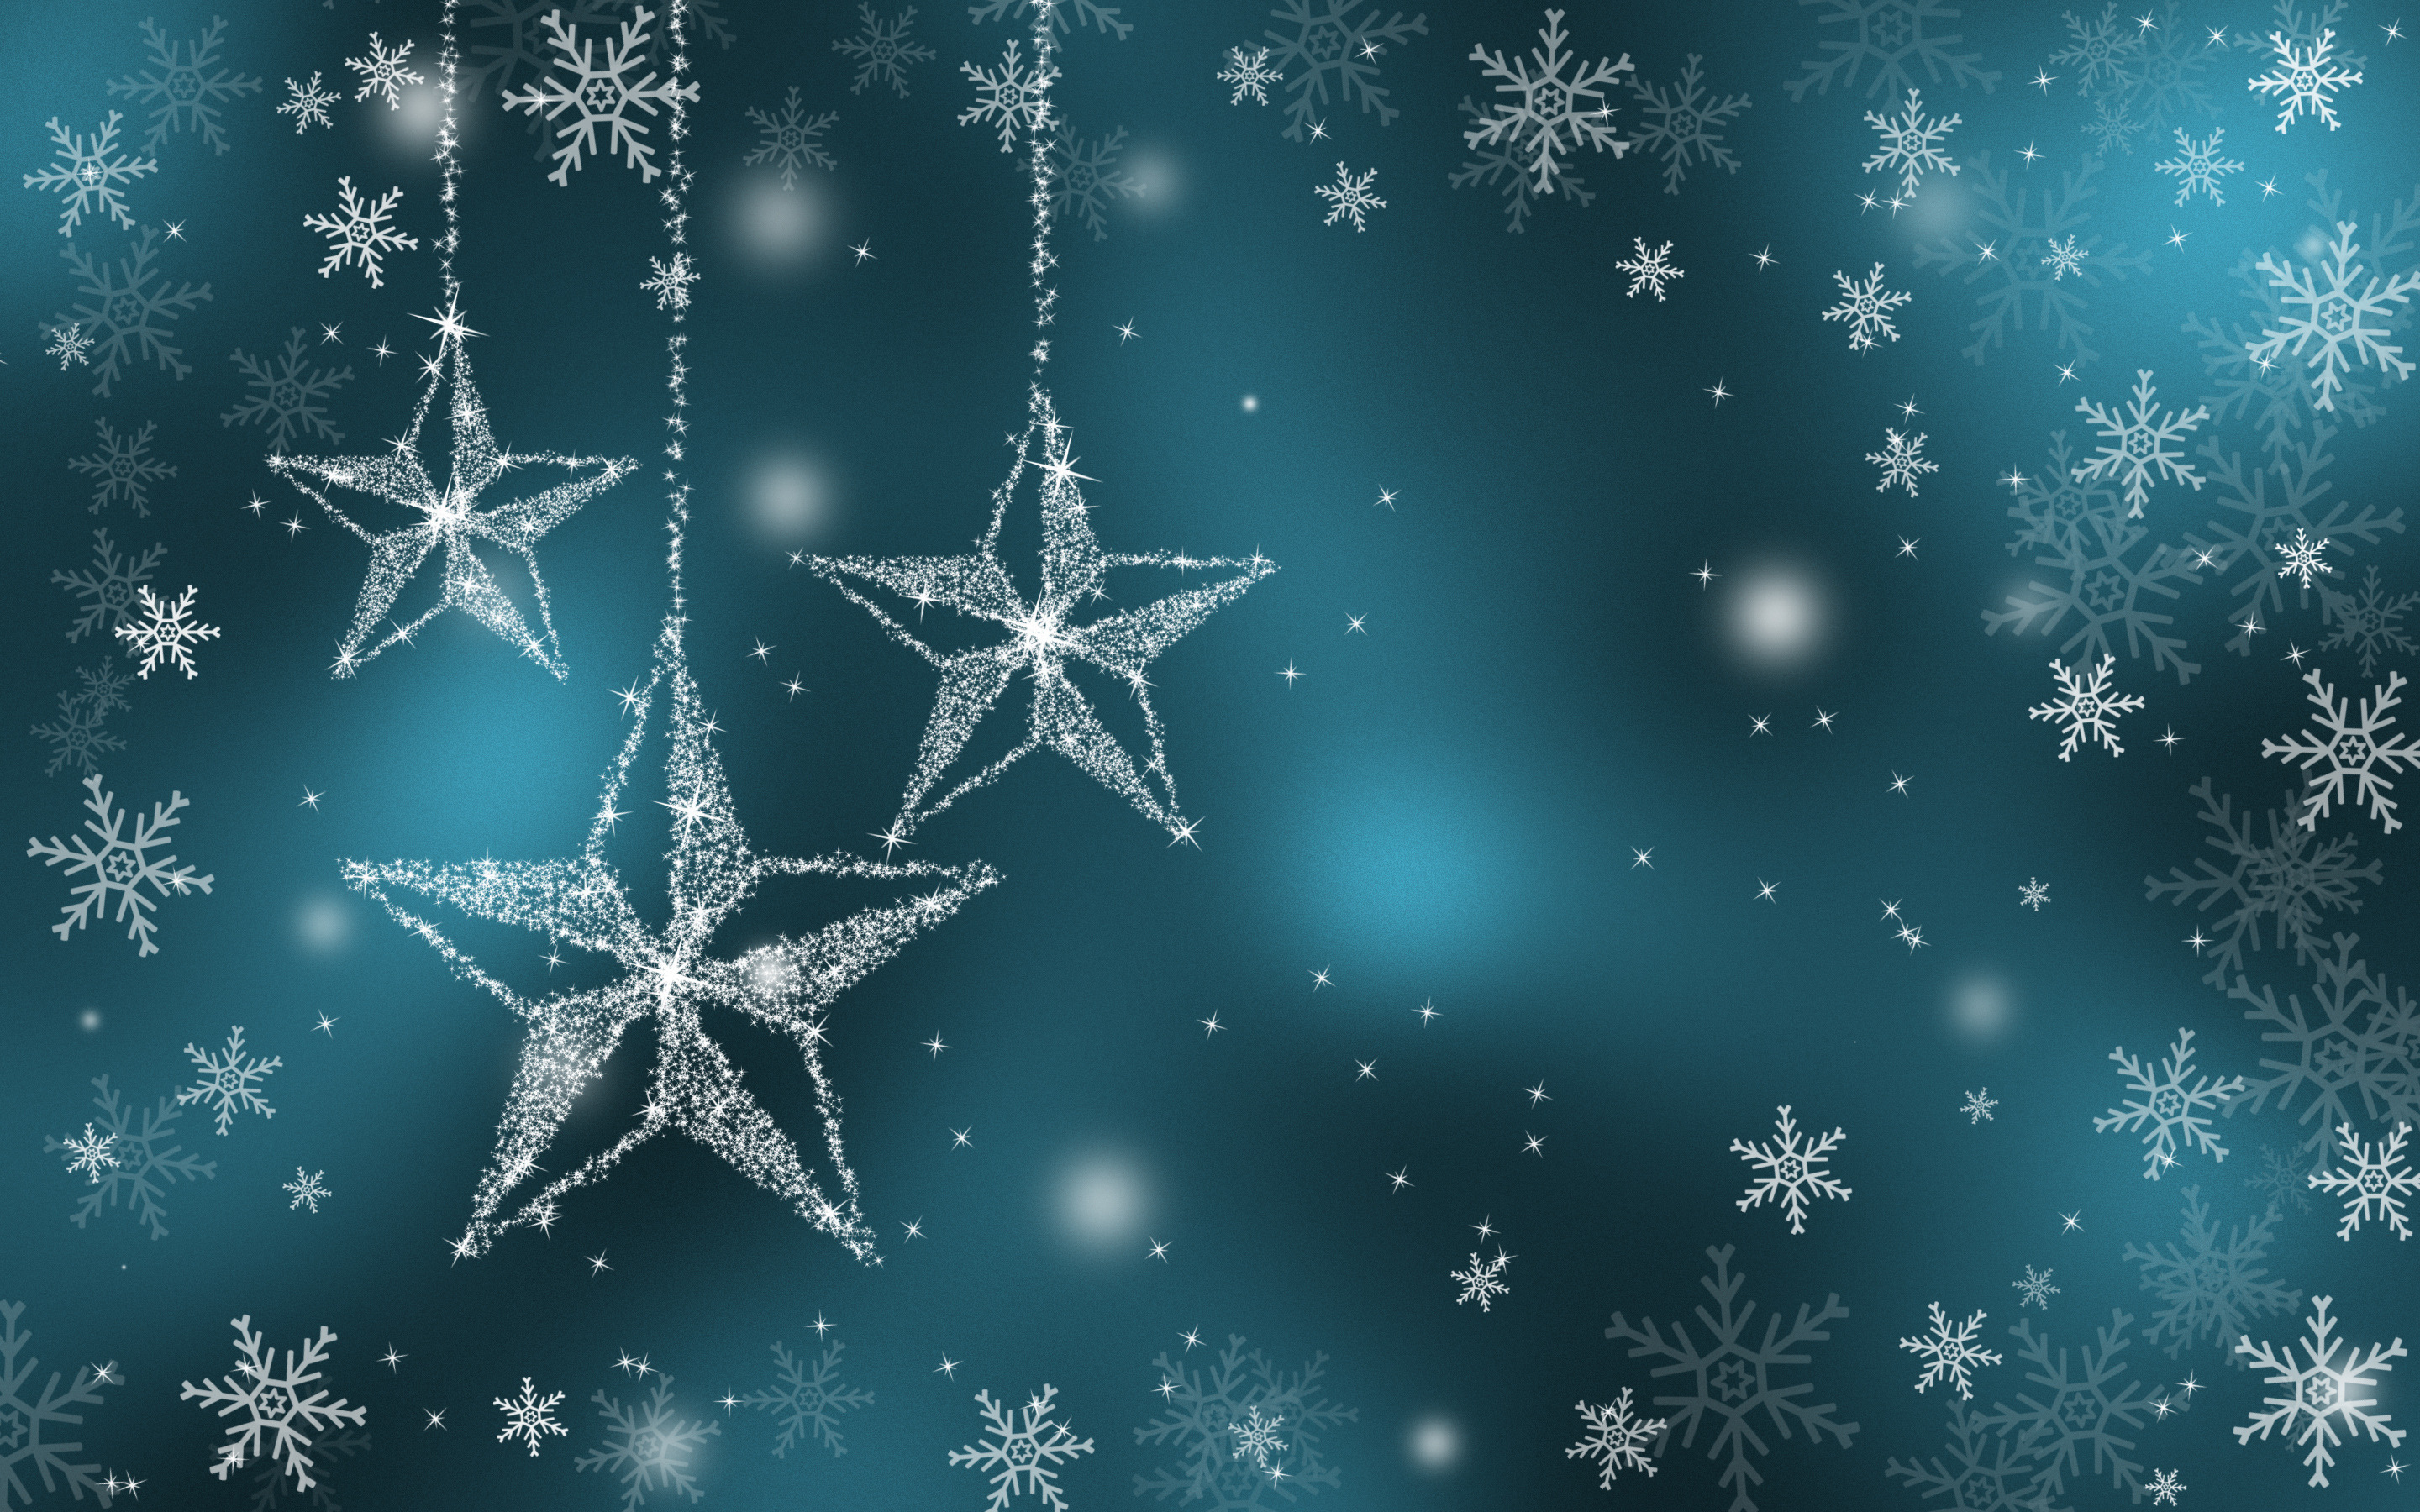 Silver Stars And Snowflakes HD Wallpaper Background Image